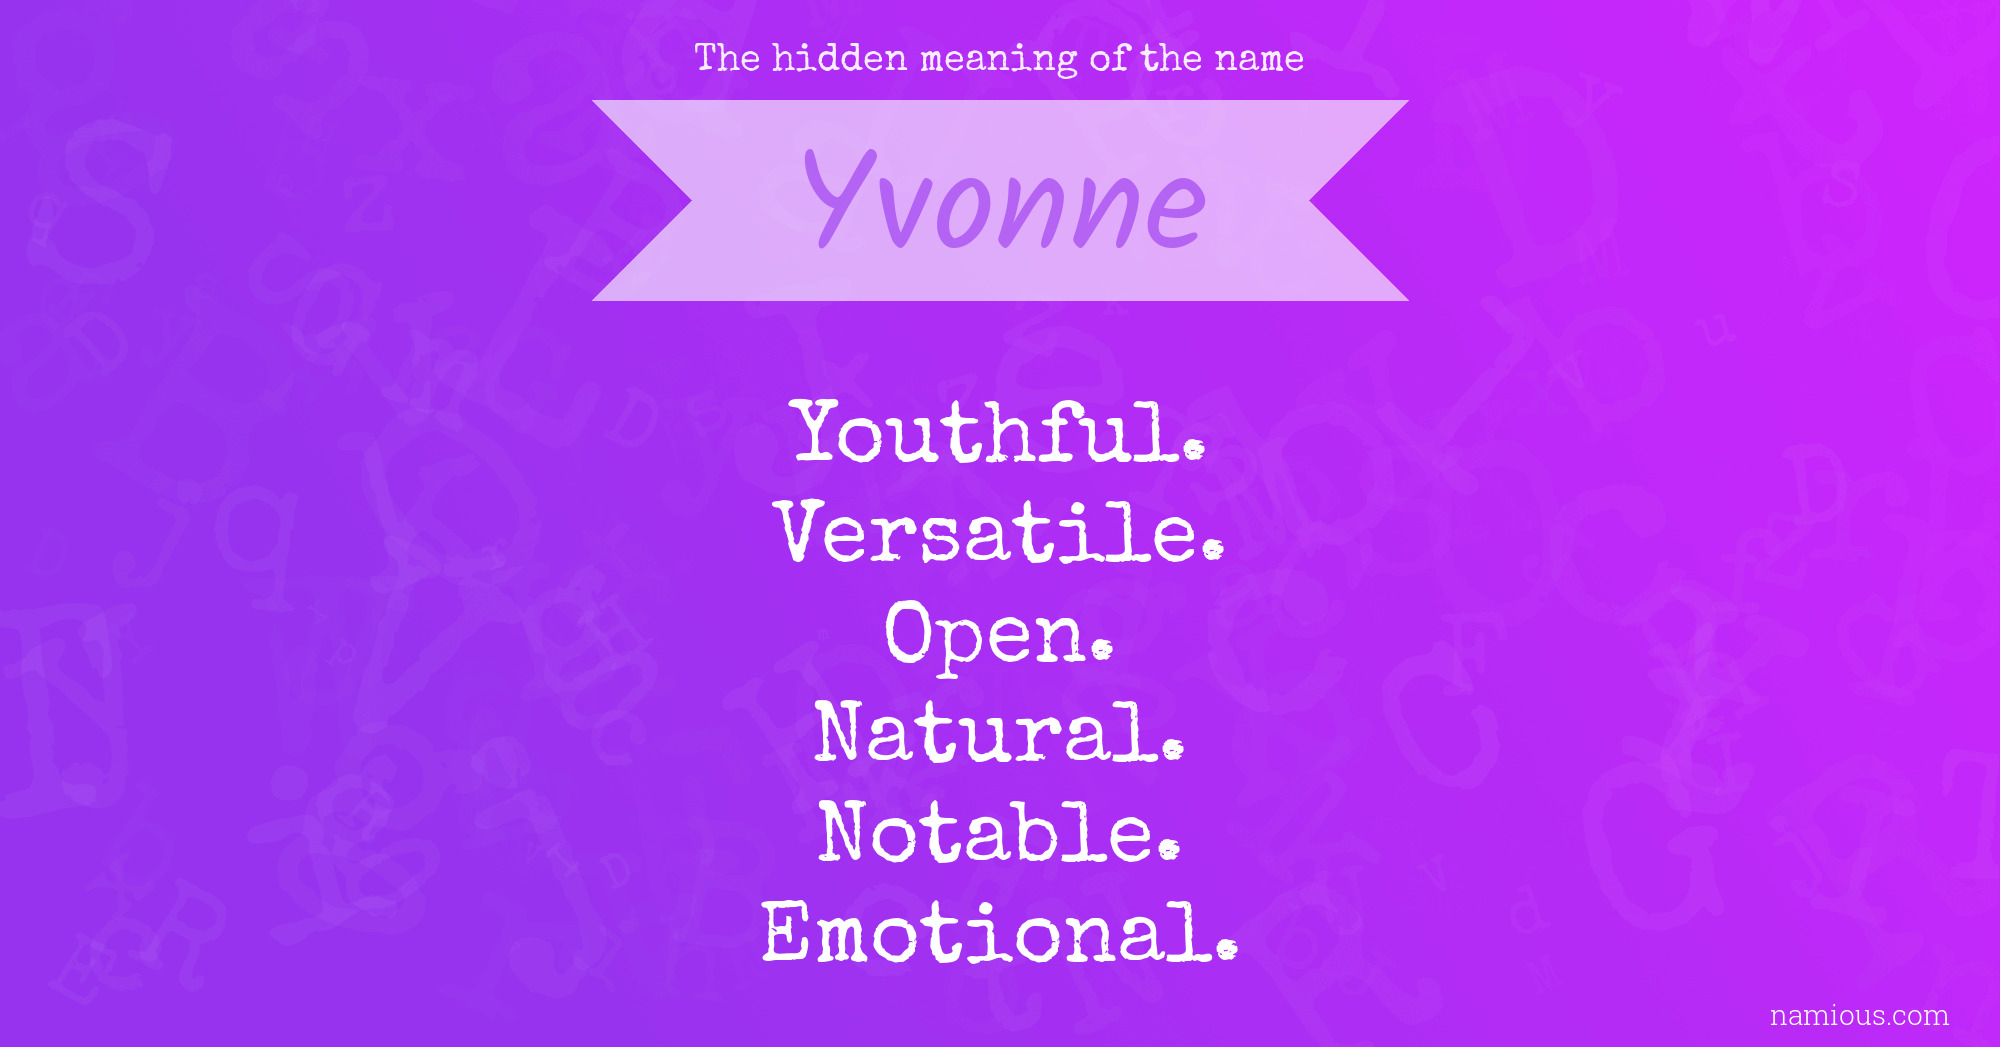 The hidden meaning of the name Yvonne